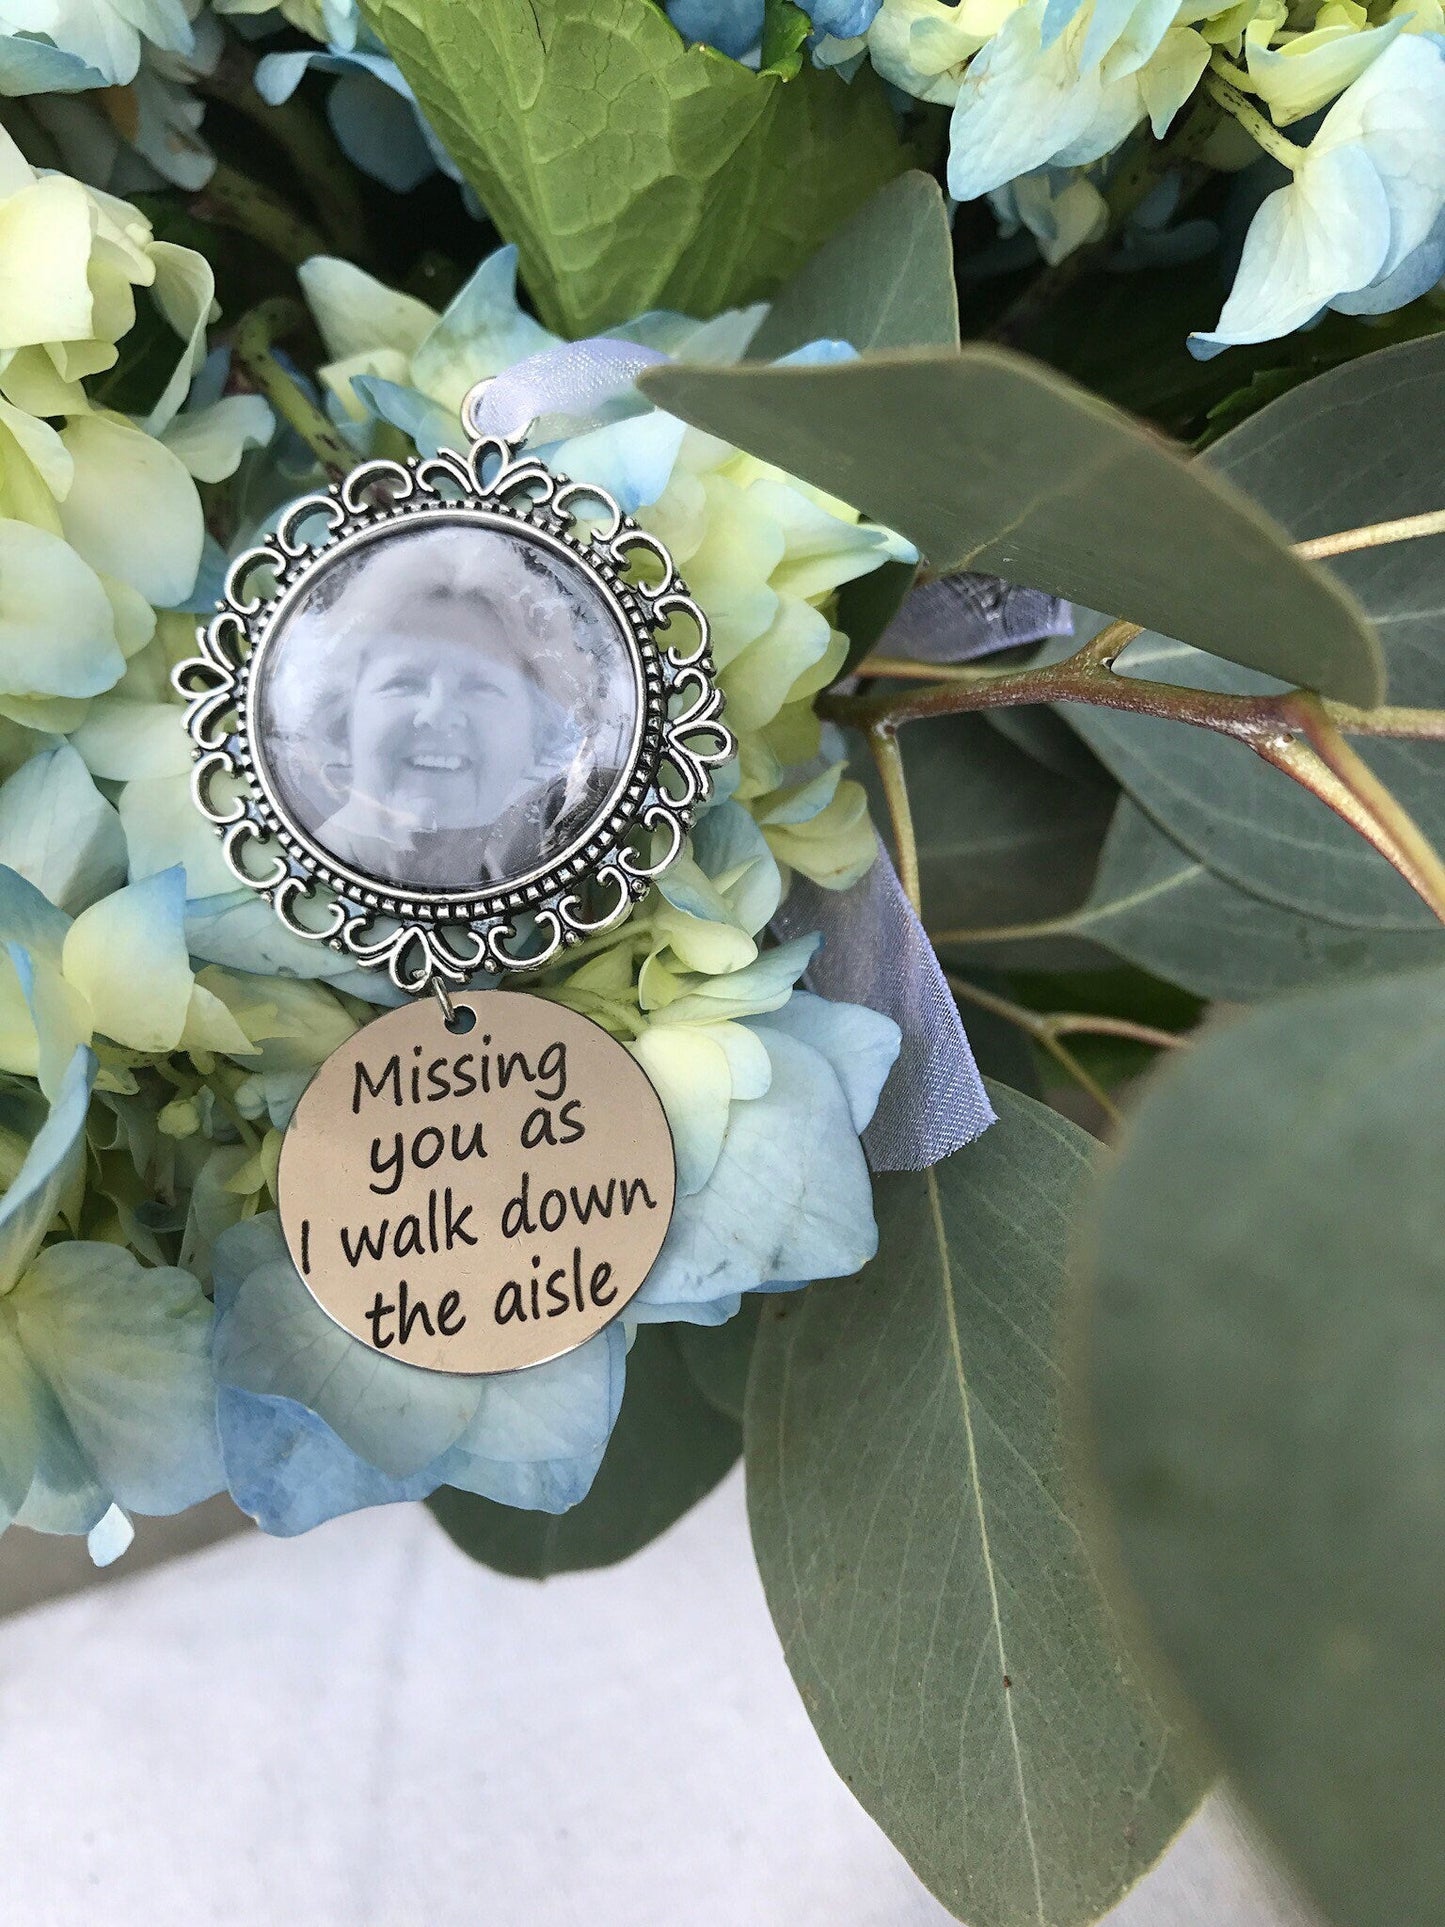 Missing you as I walk down the aisle Wedding Memory charm to hang on wedding bouquet for Bride - Silver Keepsake something blue